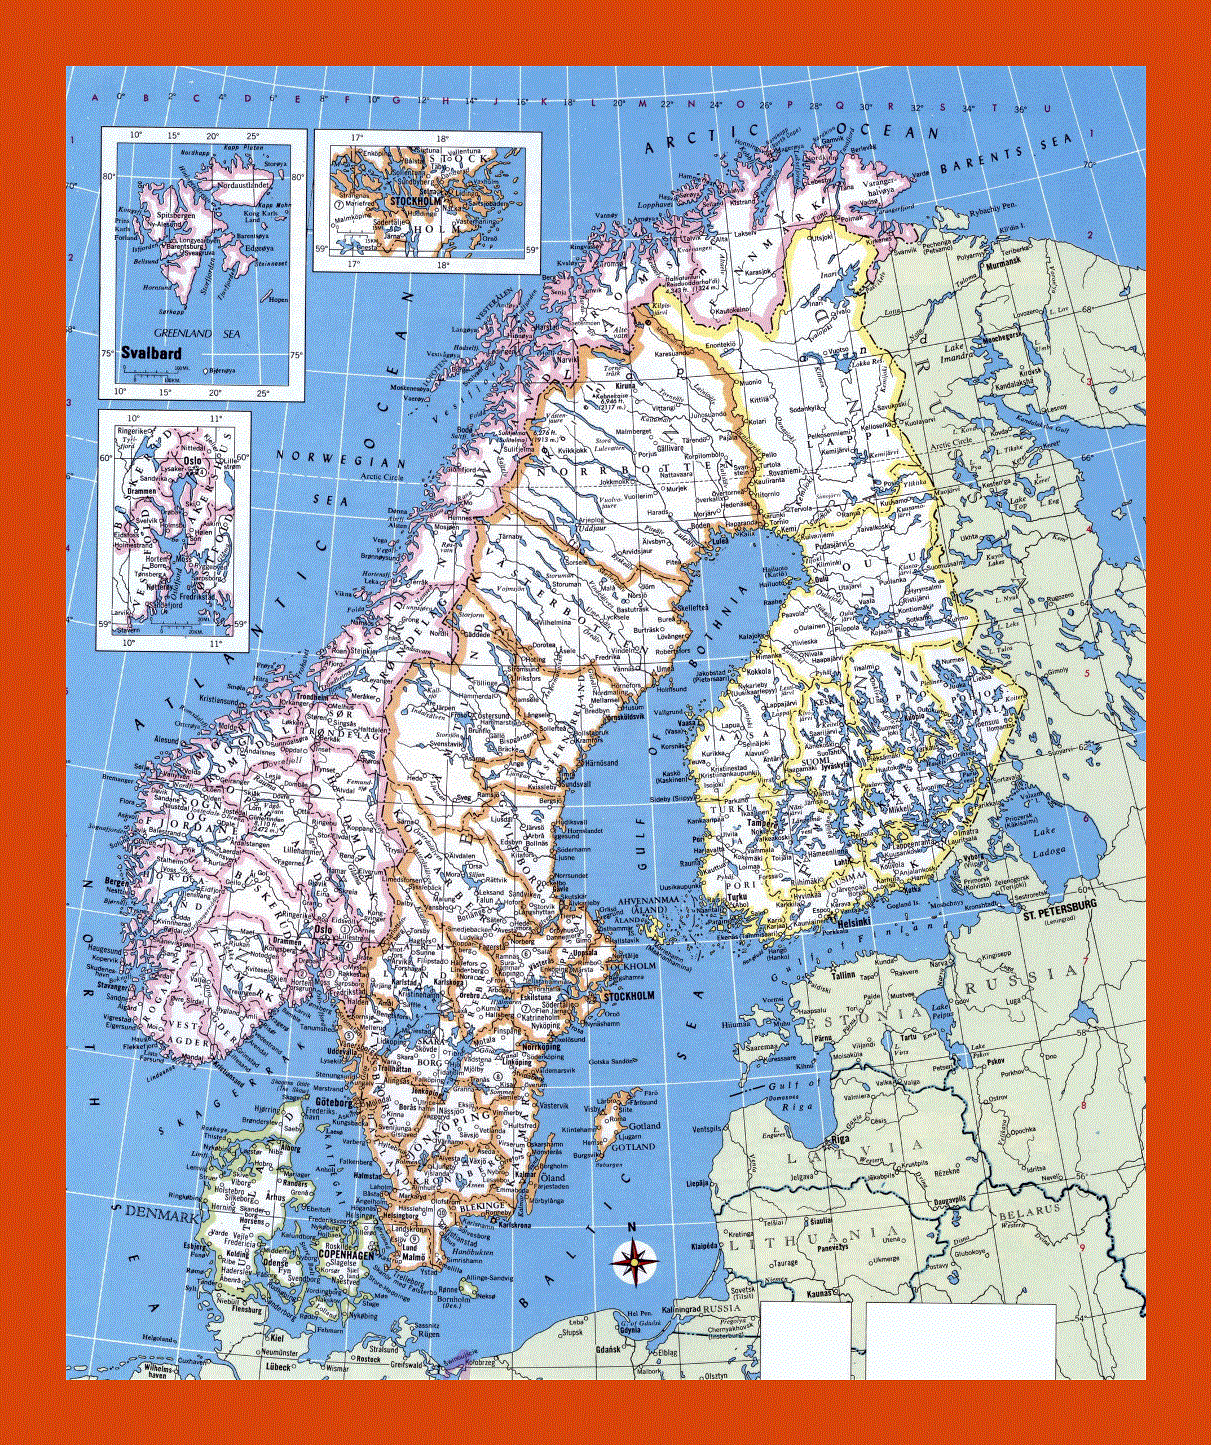 Political map of Norway, Sweden, Finland and Denmark